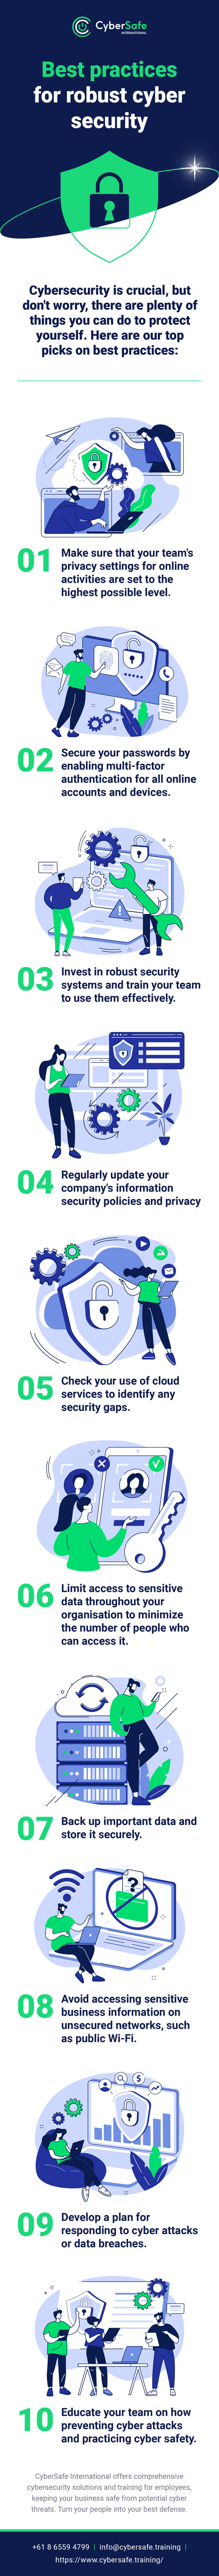 infographic explaining the best practices for robust cyber security for businesses